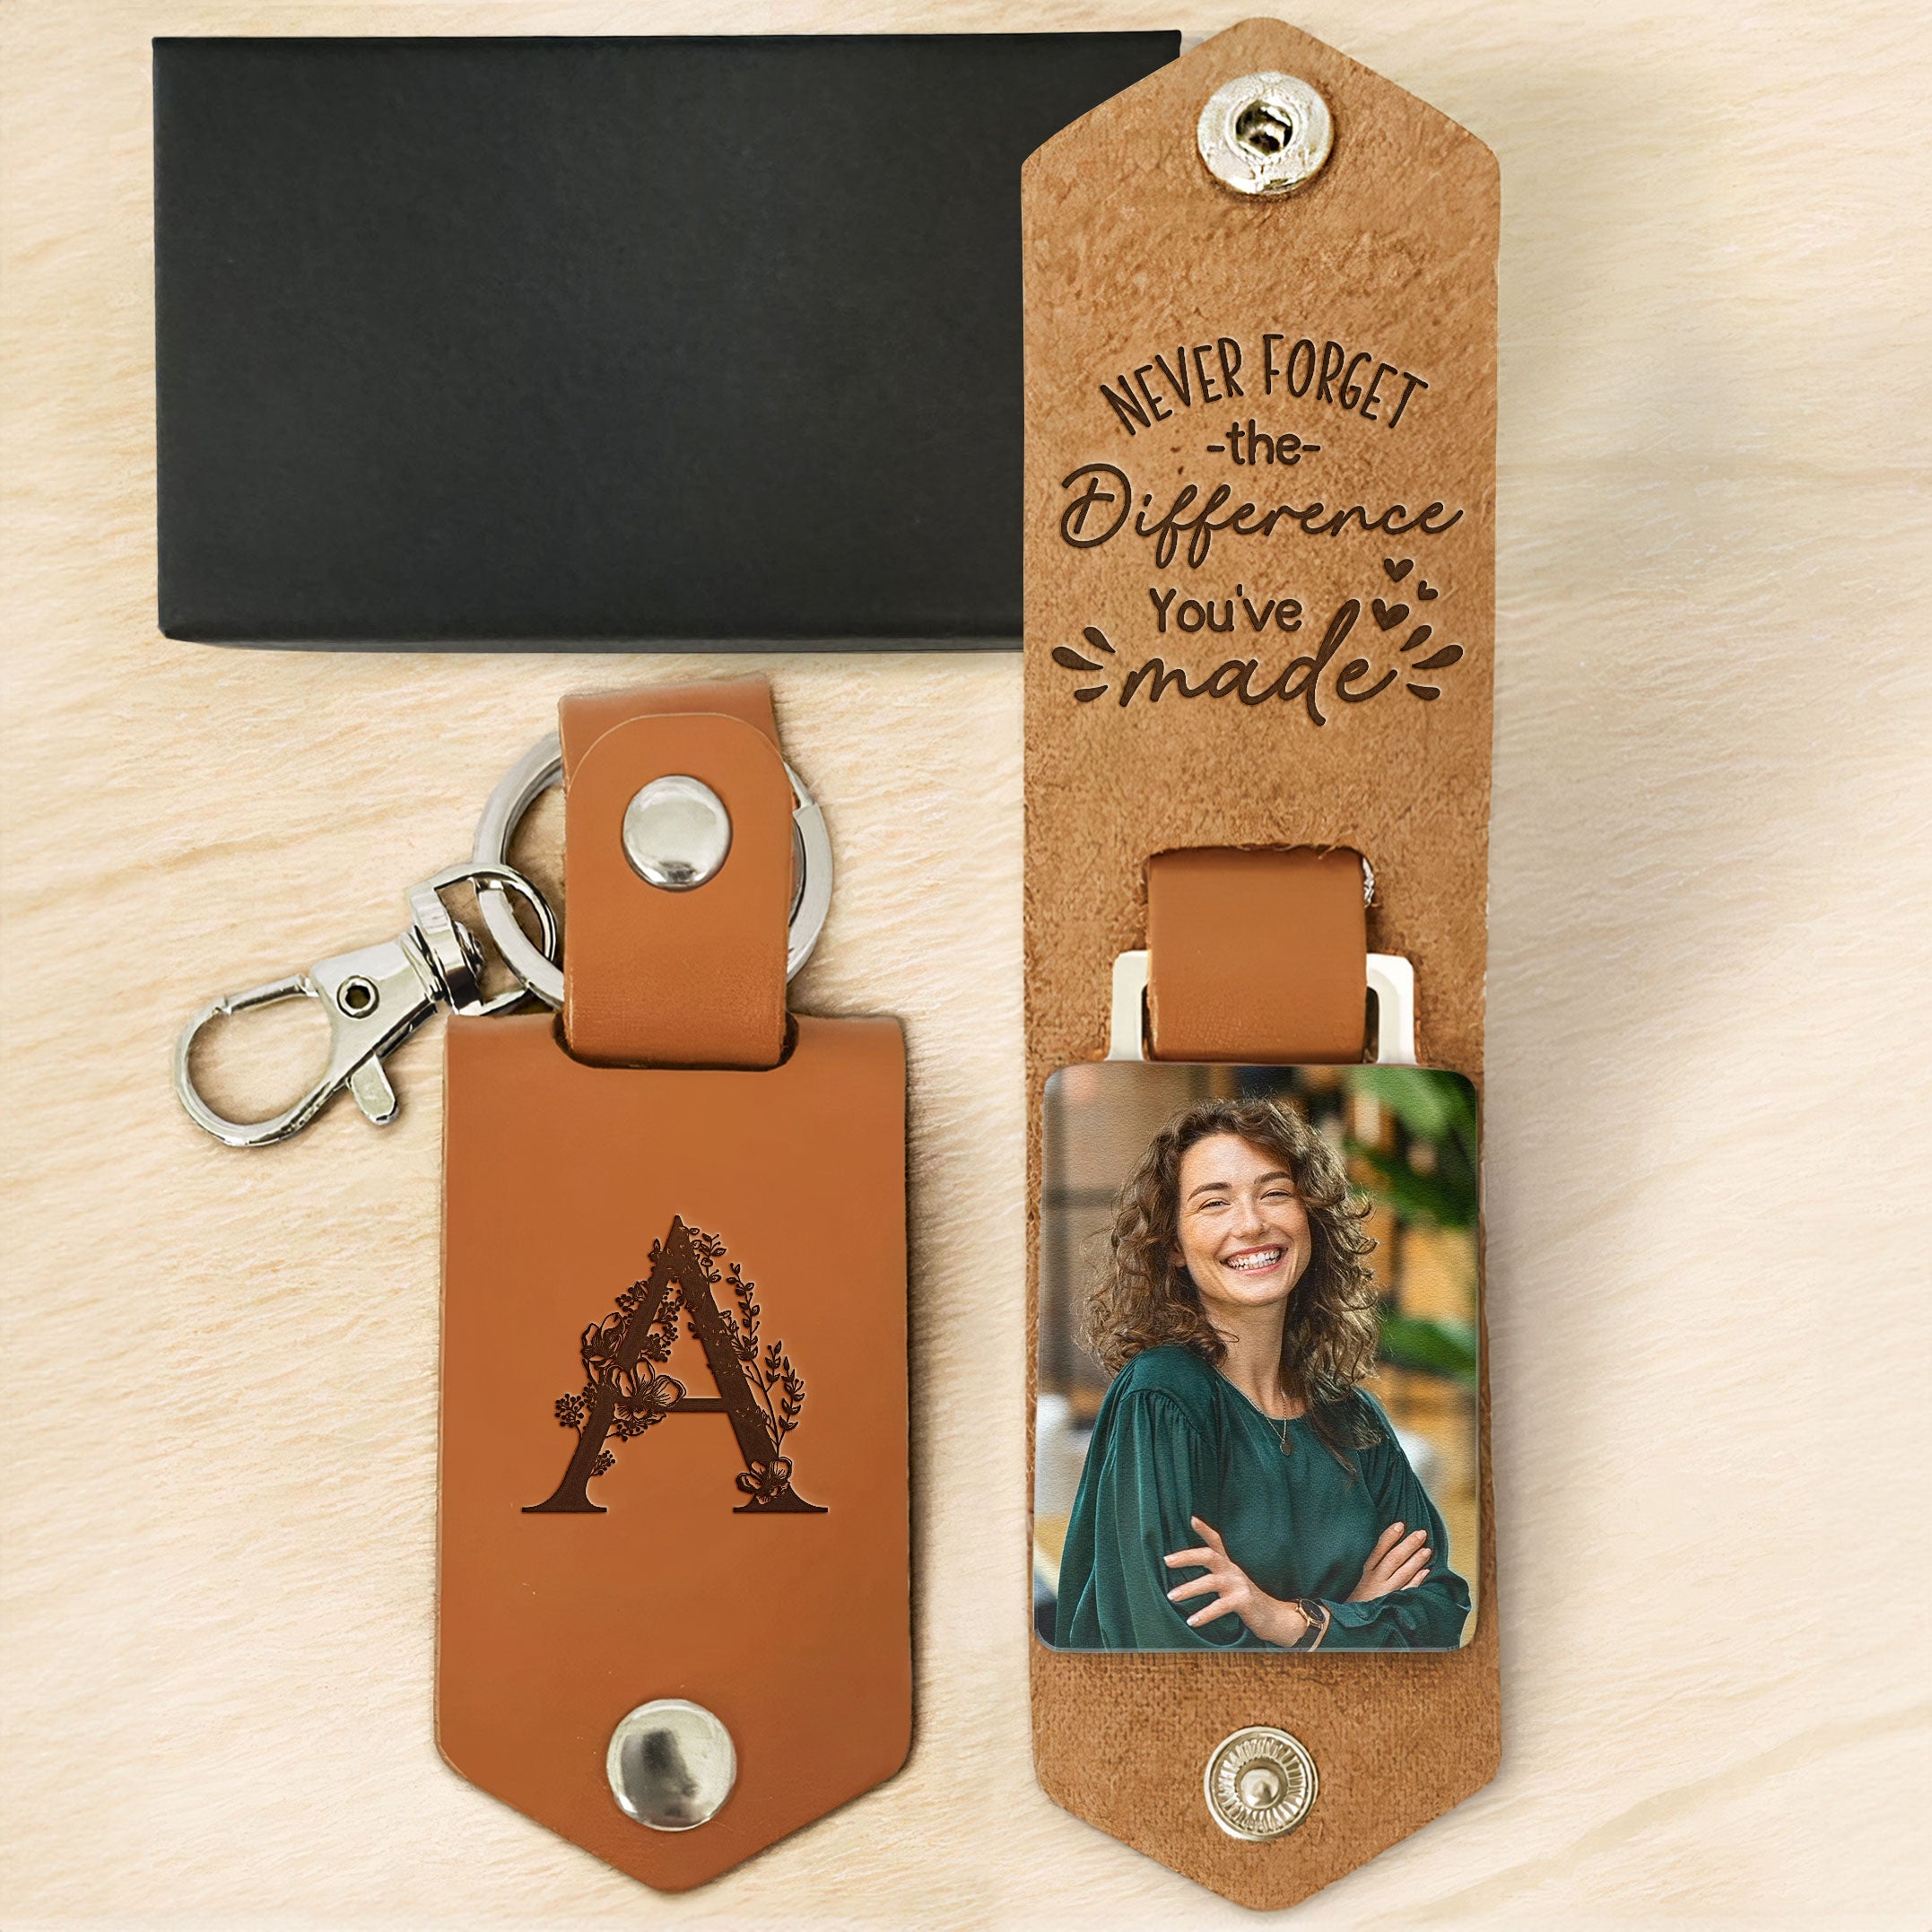 Personalized gifts for your boss - 4 great ideas!